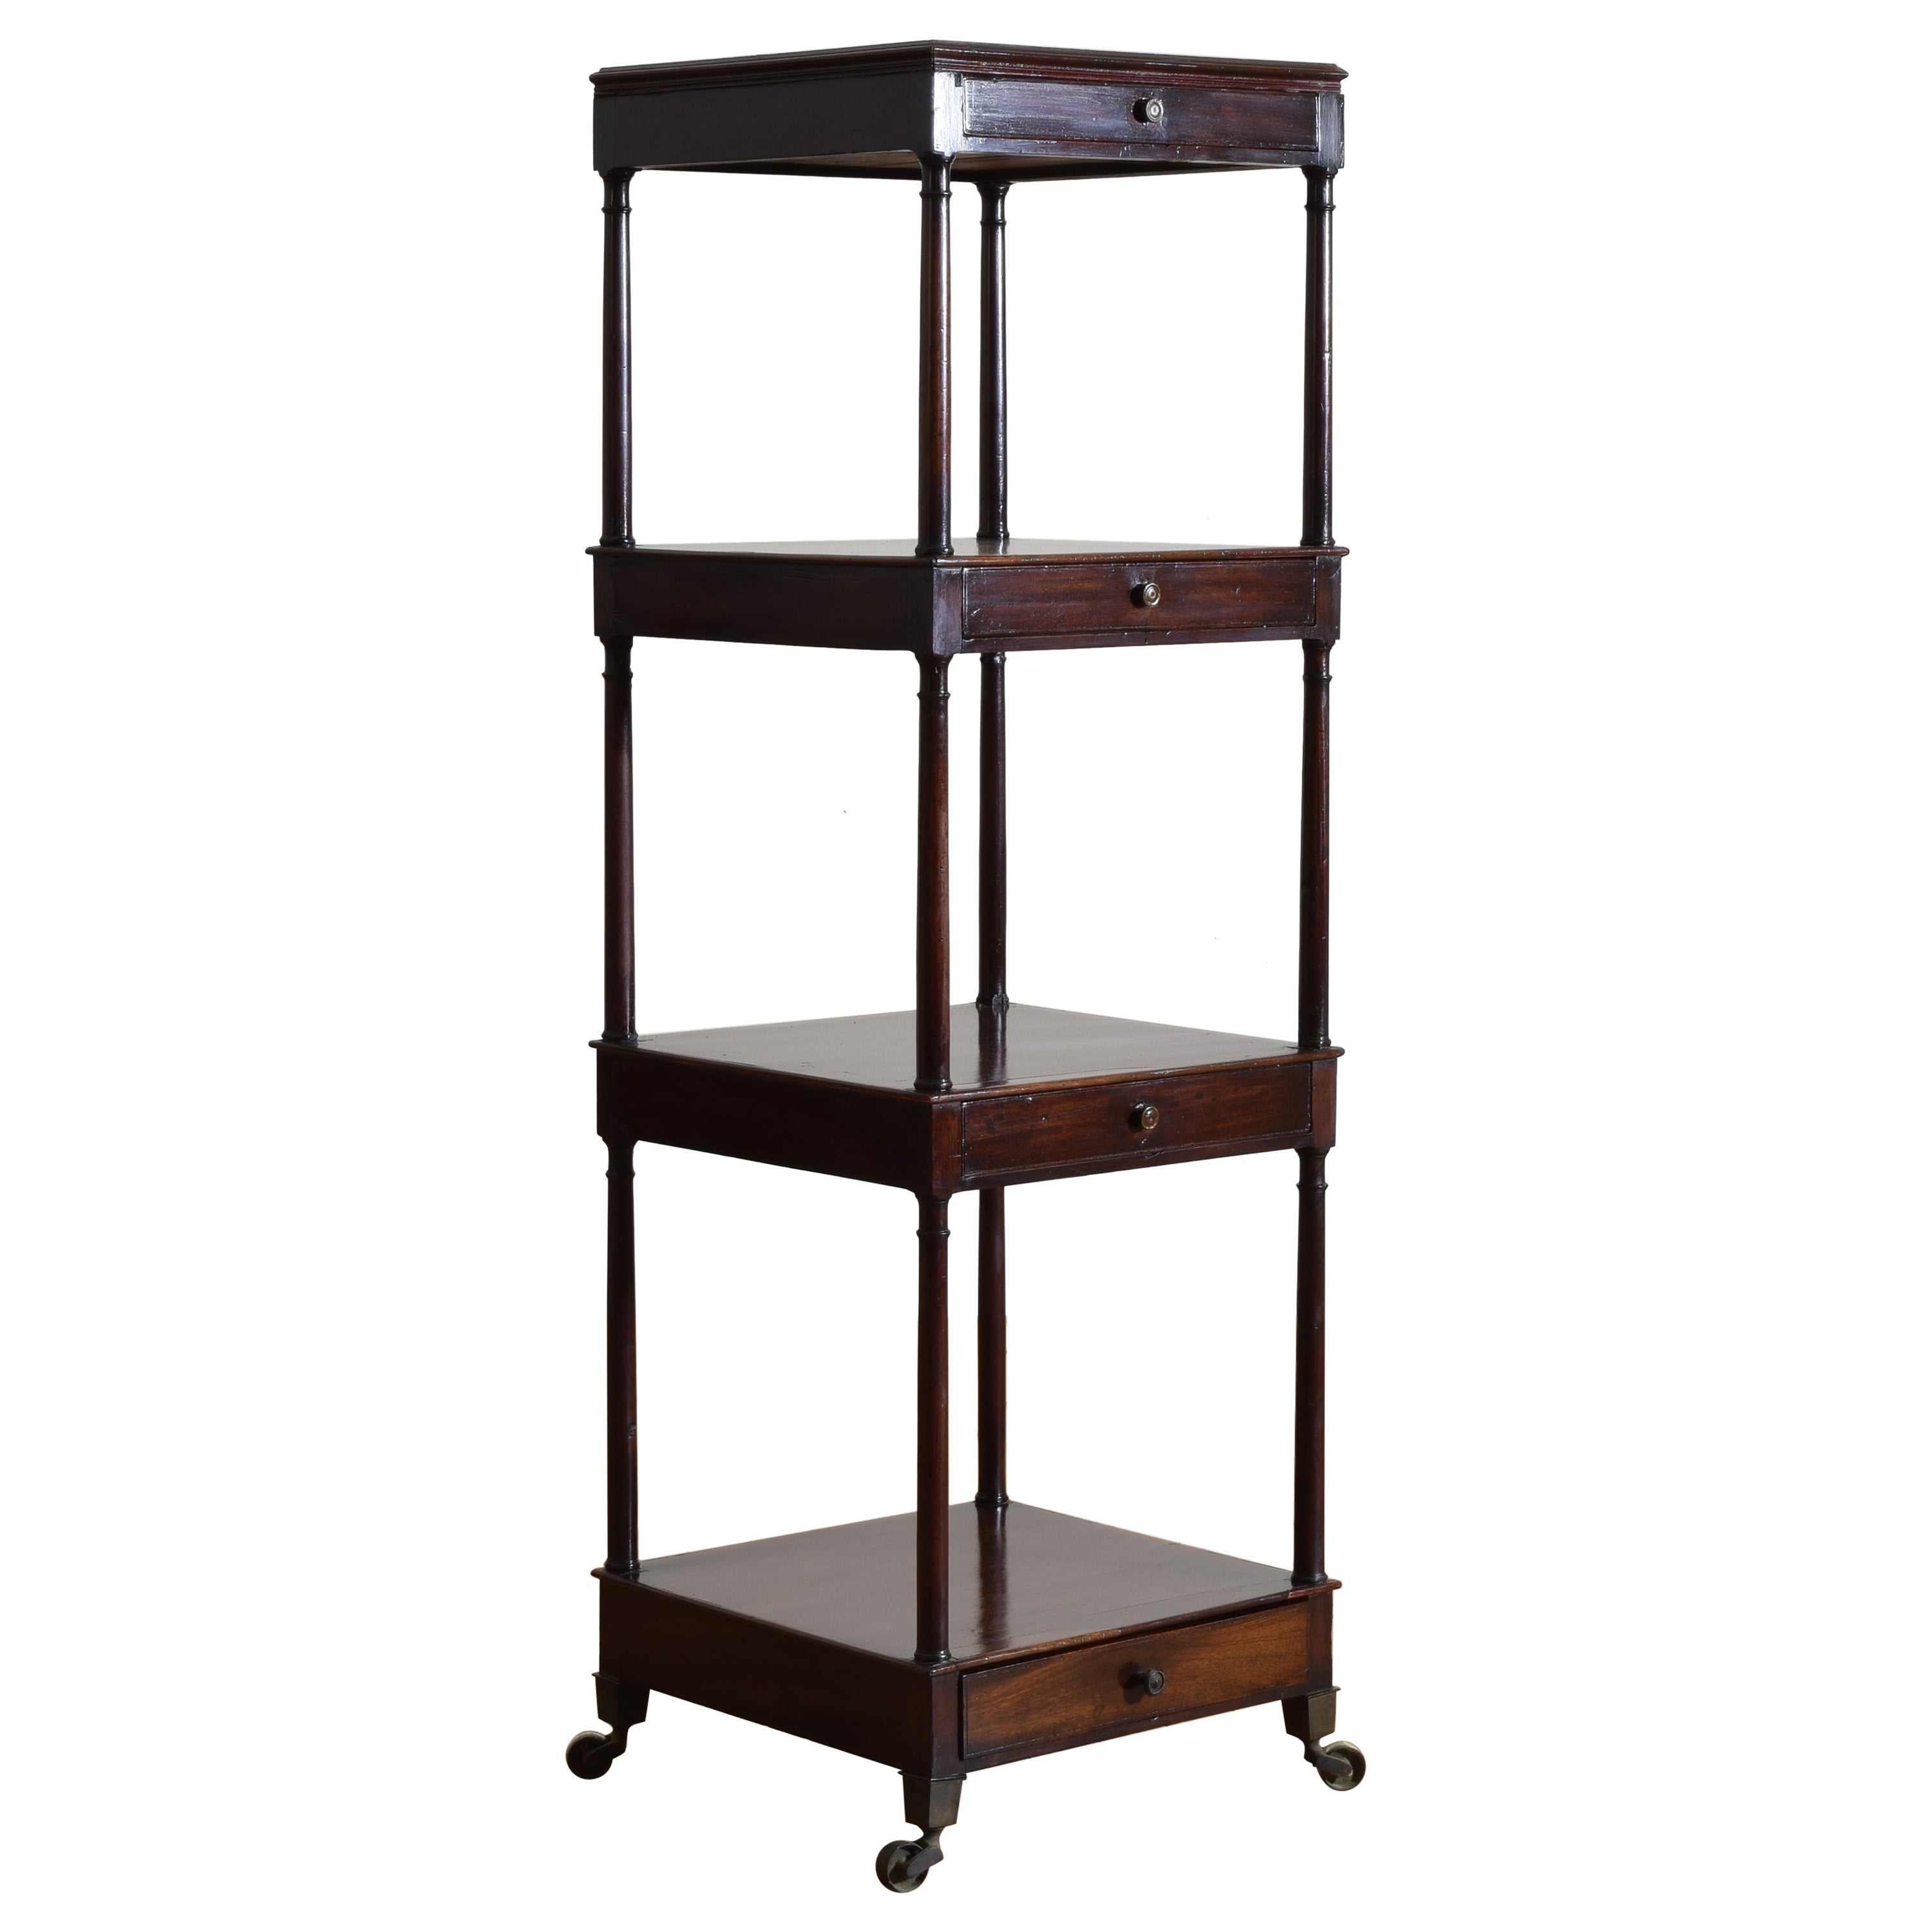 French Late Neoclassic Period 4-Tier, 4-Drawer Mahogany Etagere, ca. 1840 For Sale